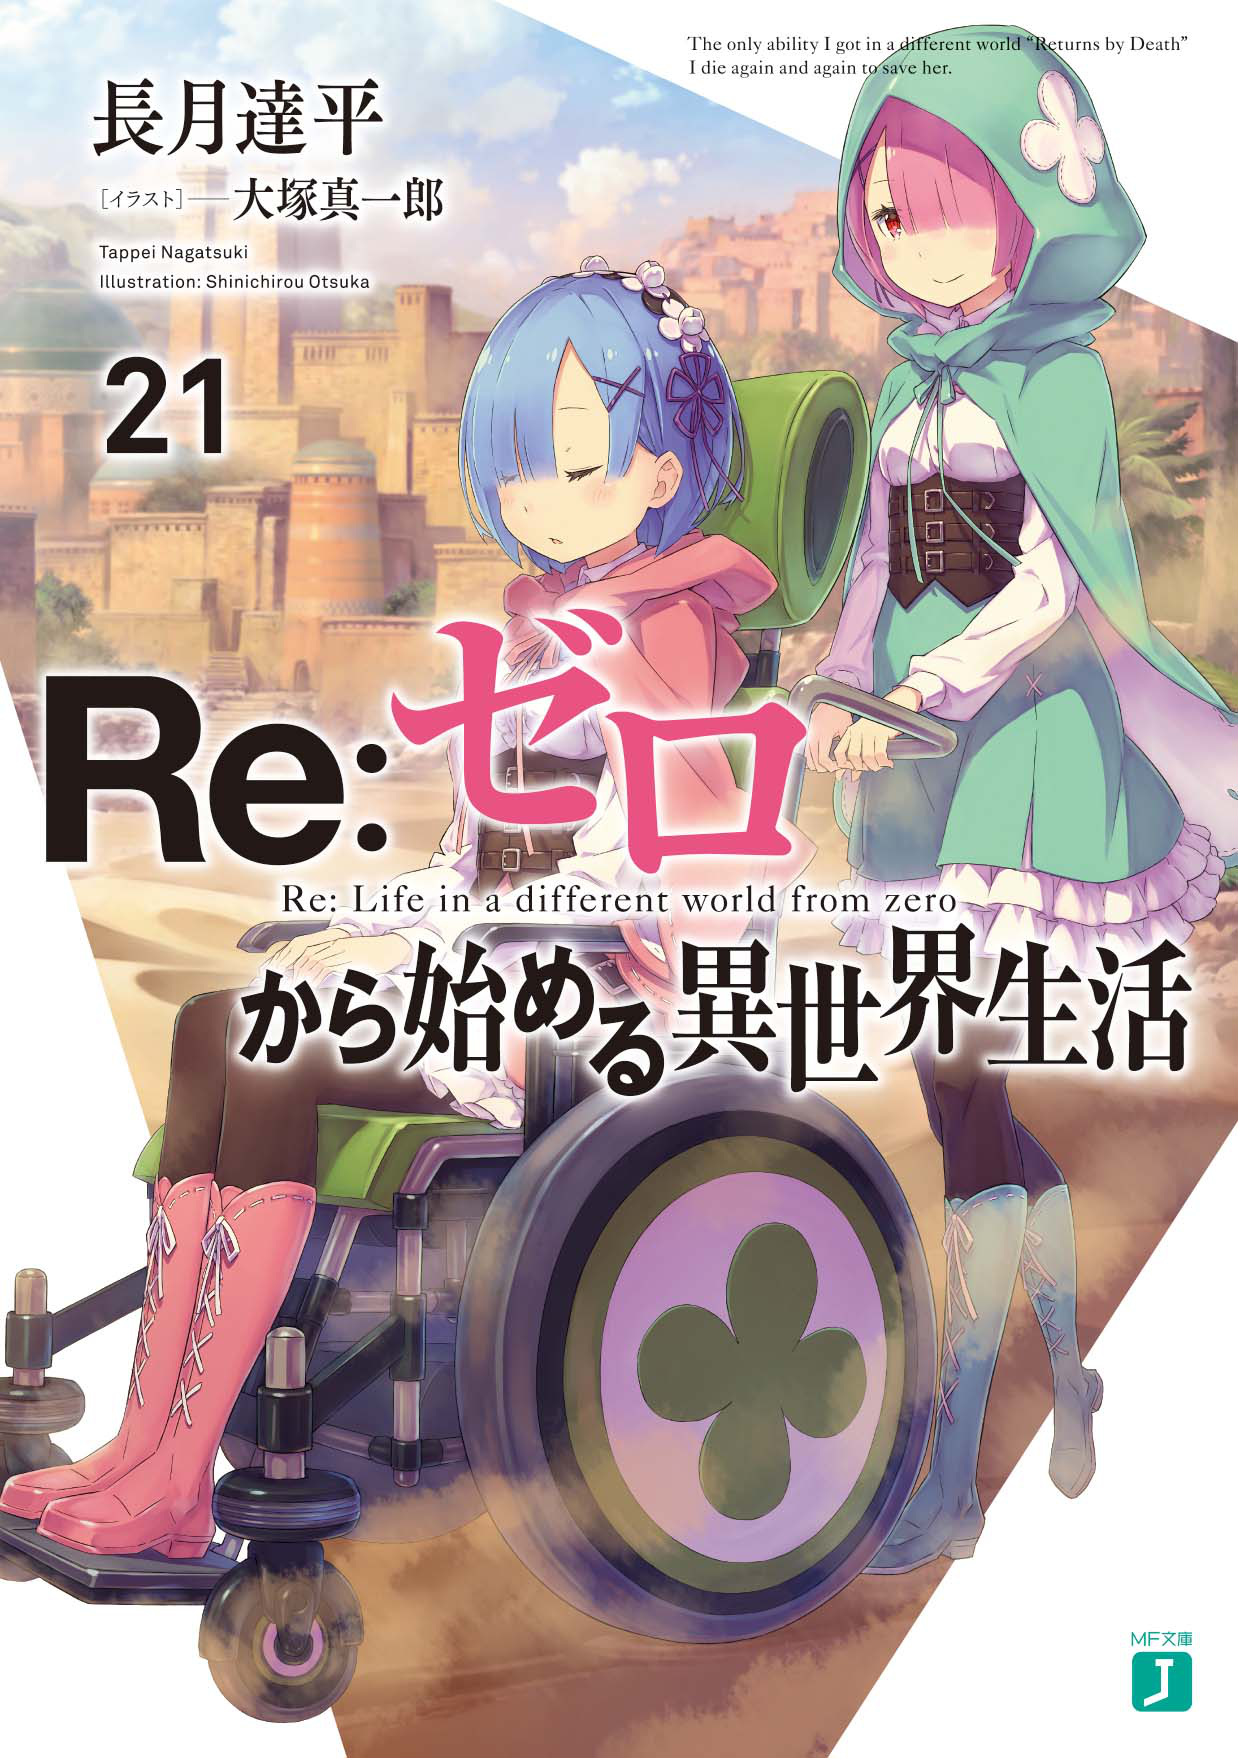 Re:ZERO -Starting Life in Another World-, The Frozen Bond, Vol. 3 by Tappei  Nagatsuki